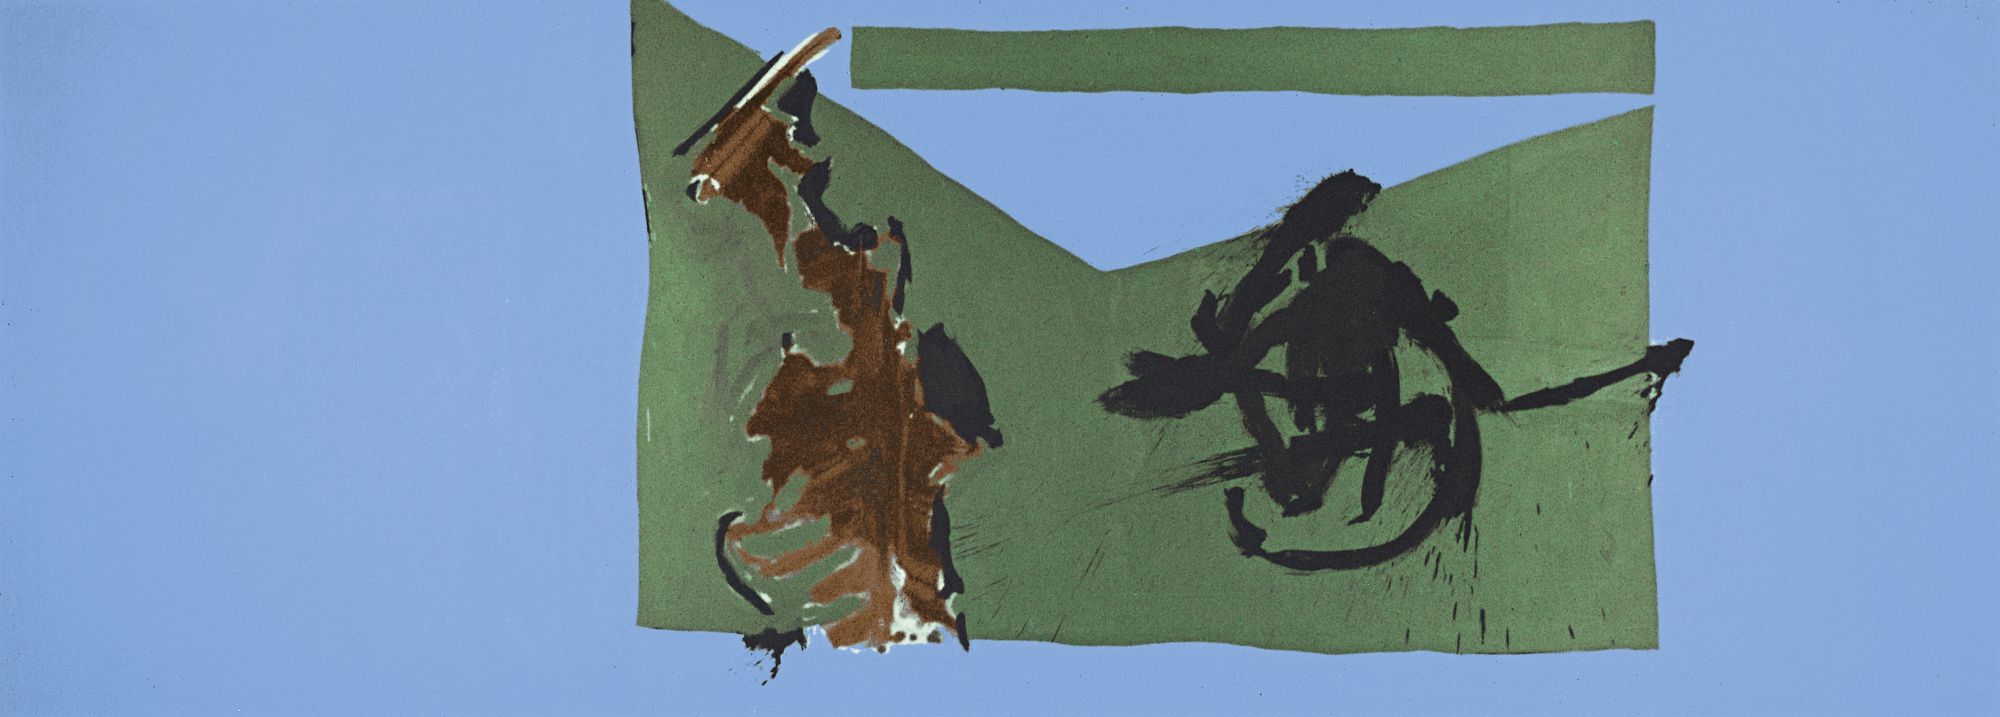 In Green and Ultramarine, 1963–1964/ca. 1976. Oil and charcoal on canvas, 88 x 248 inches (223.5 x 629.9 cm)